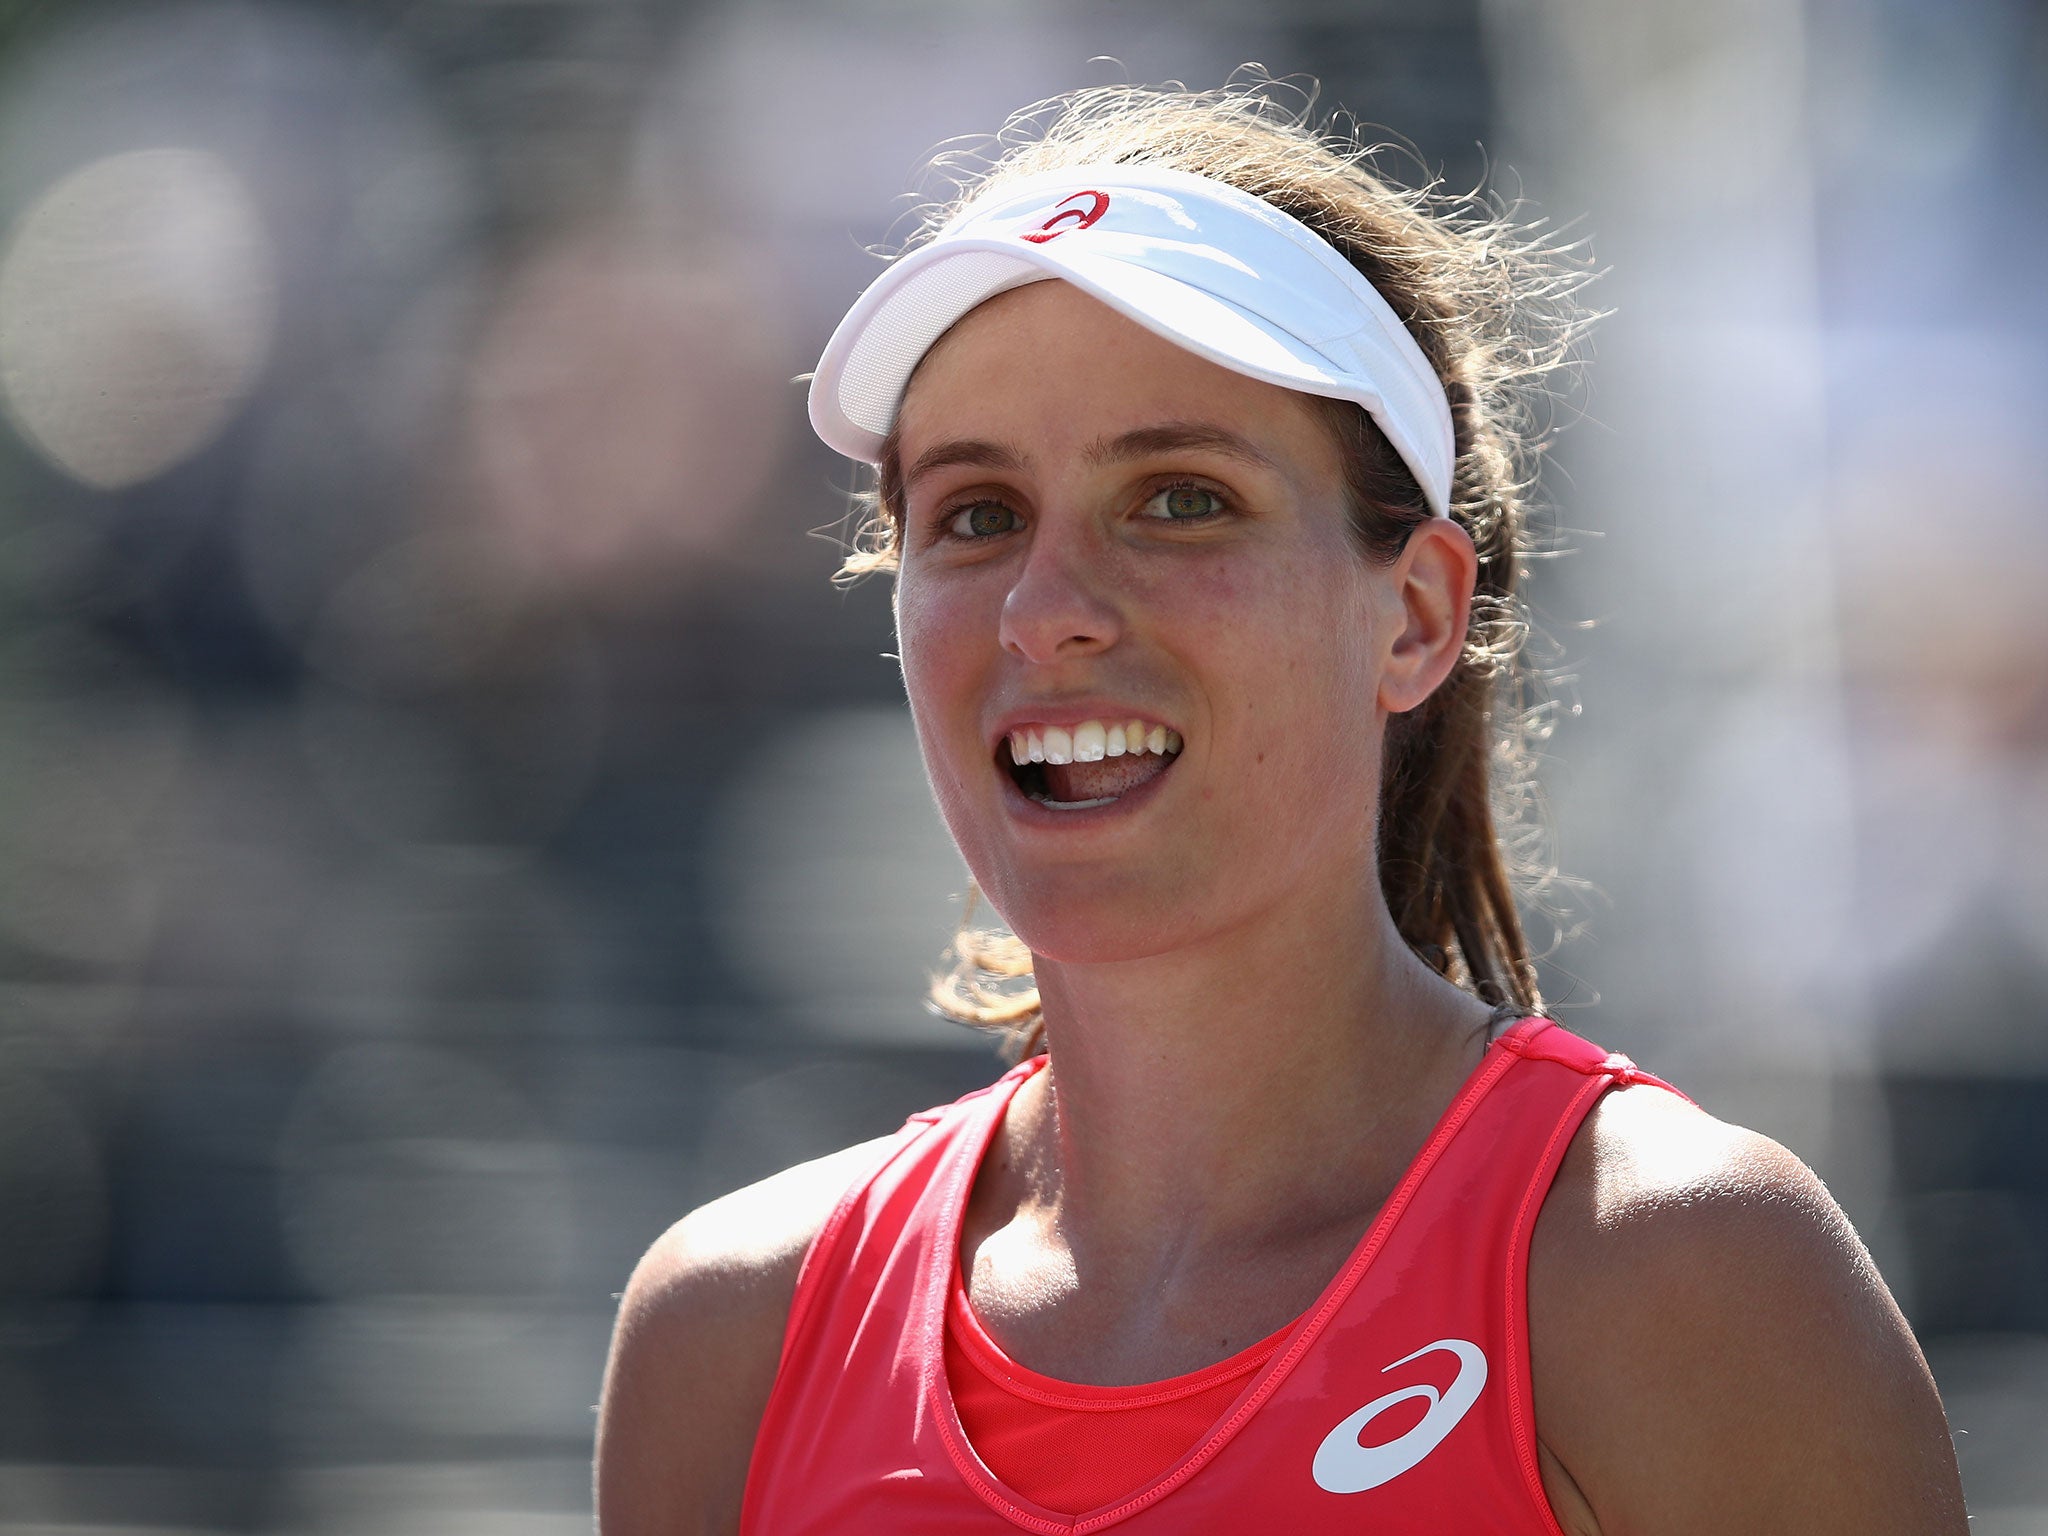 Johanna Konta is through to the Miami Open semi-finals after defeating Simona Halep